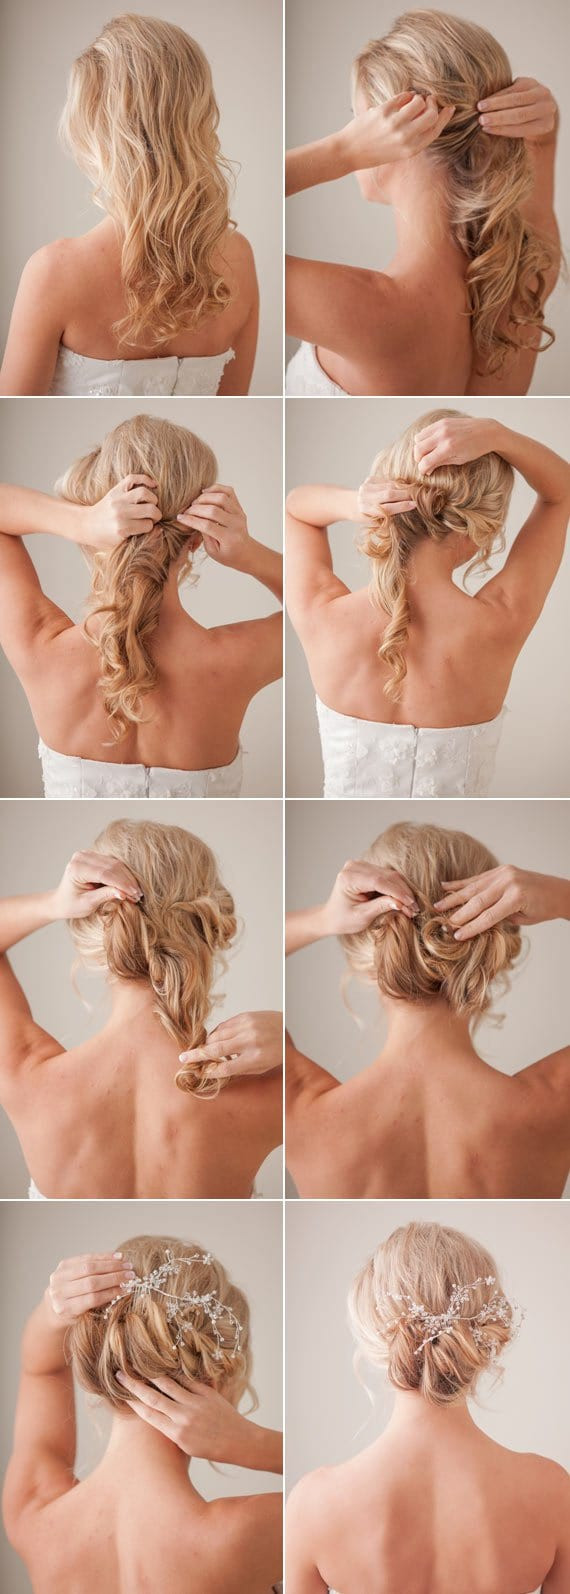 Quick DIY Hairstyles
 17 Quick And Easy DIY Hairstyle Tutorials